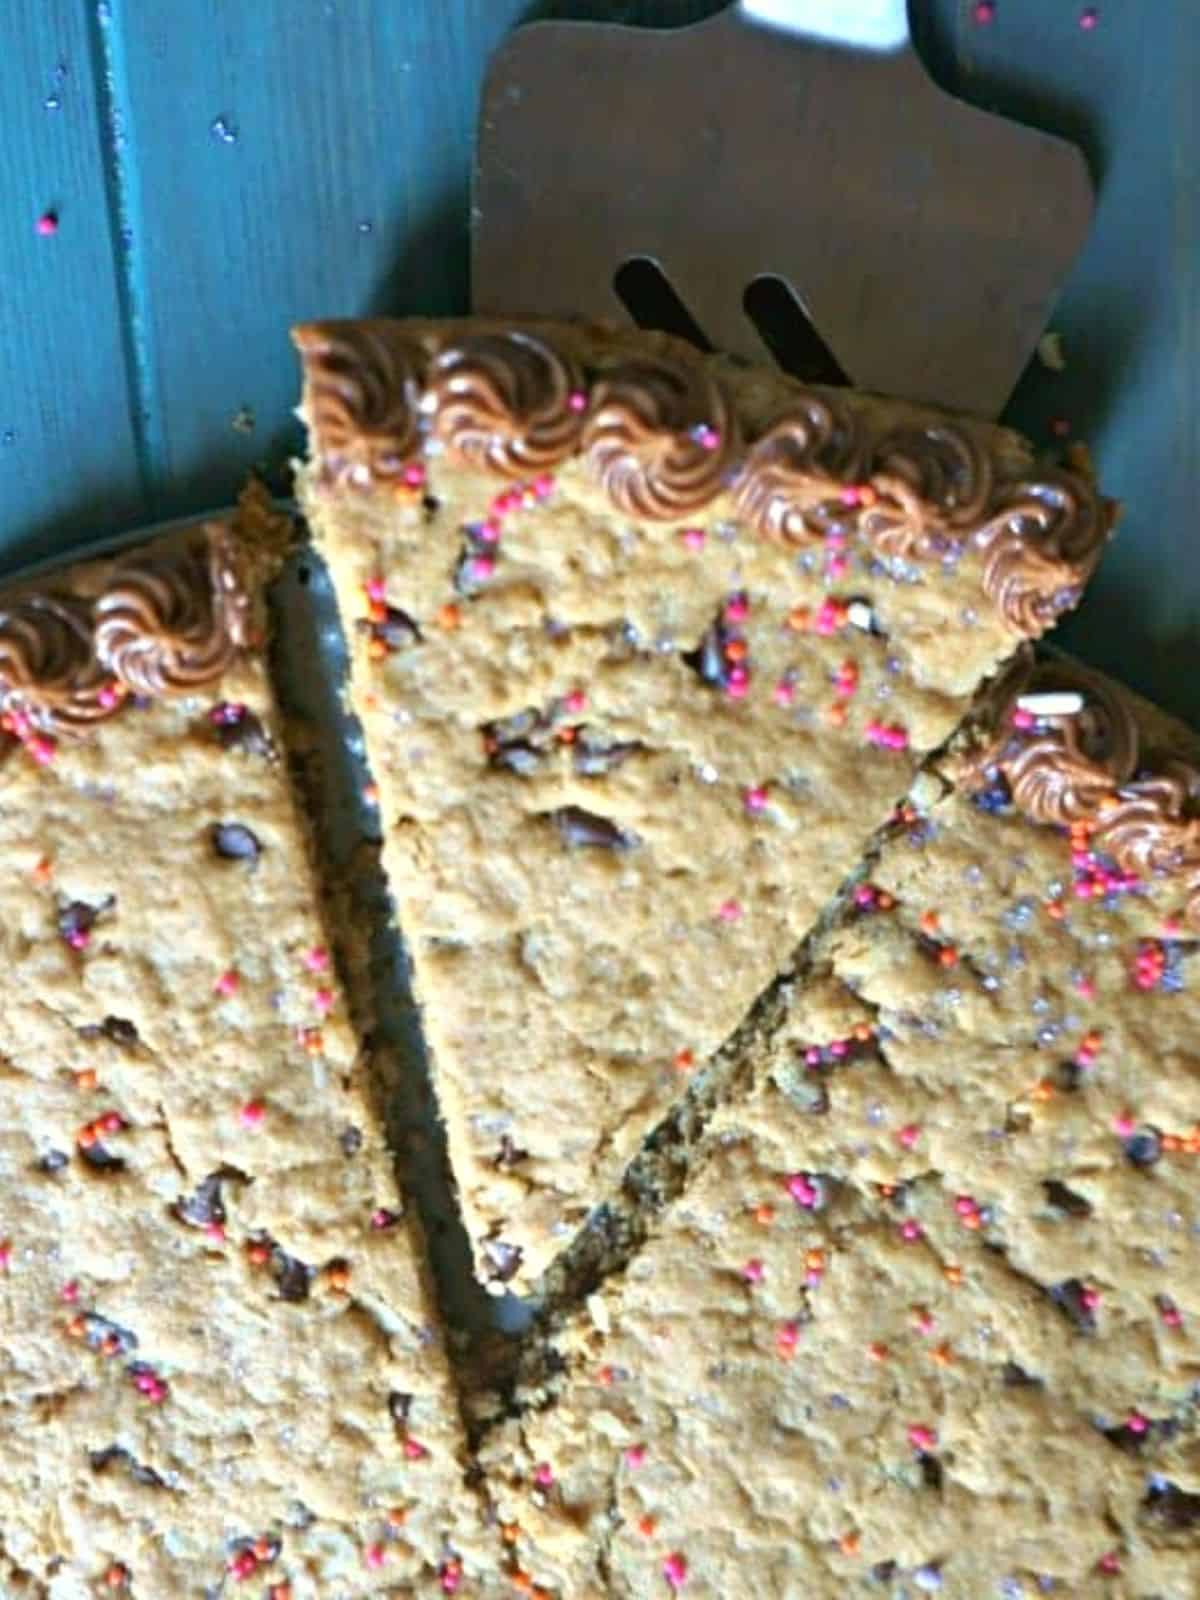 Slice of gluten free cookie cake with chocolate piping and sprinkles.